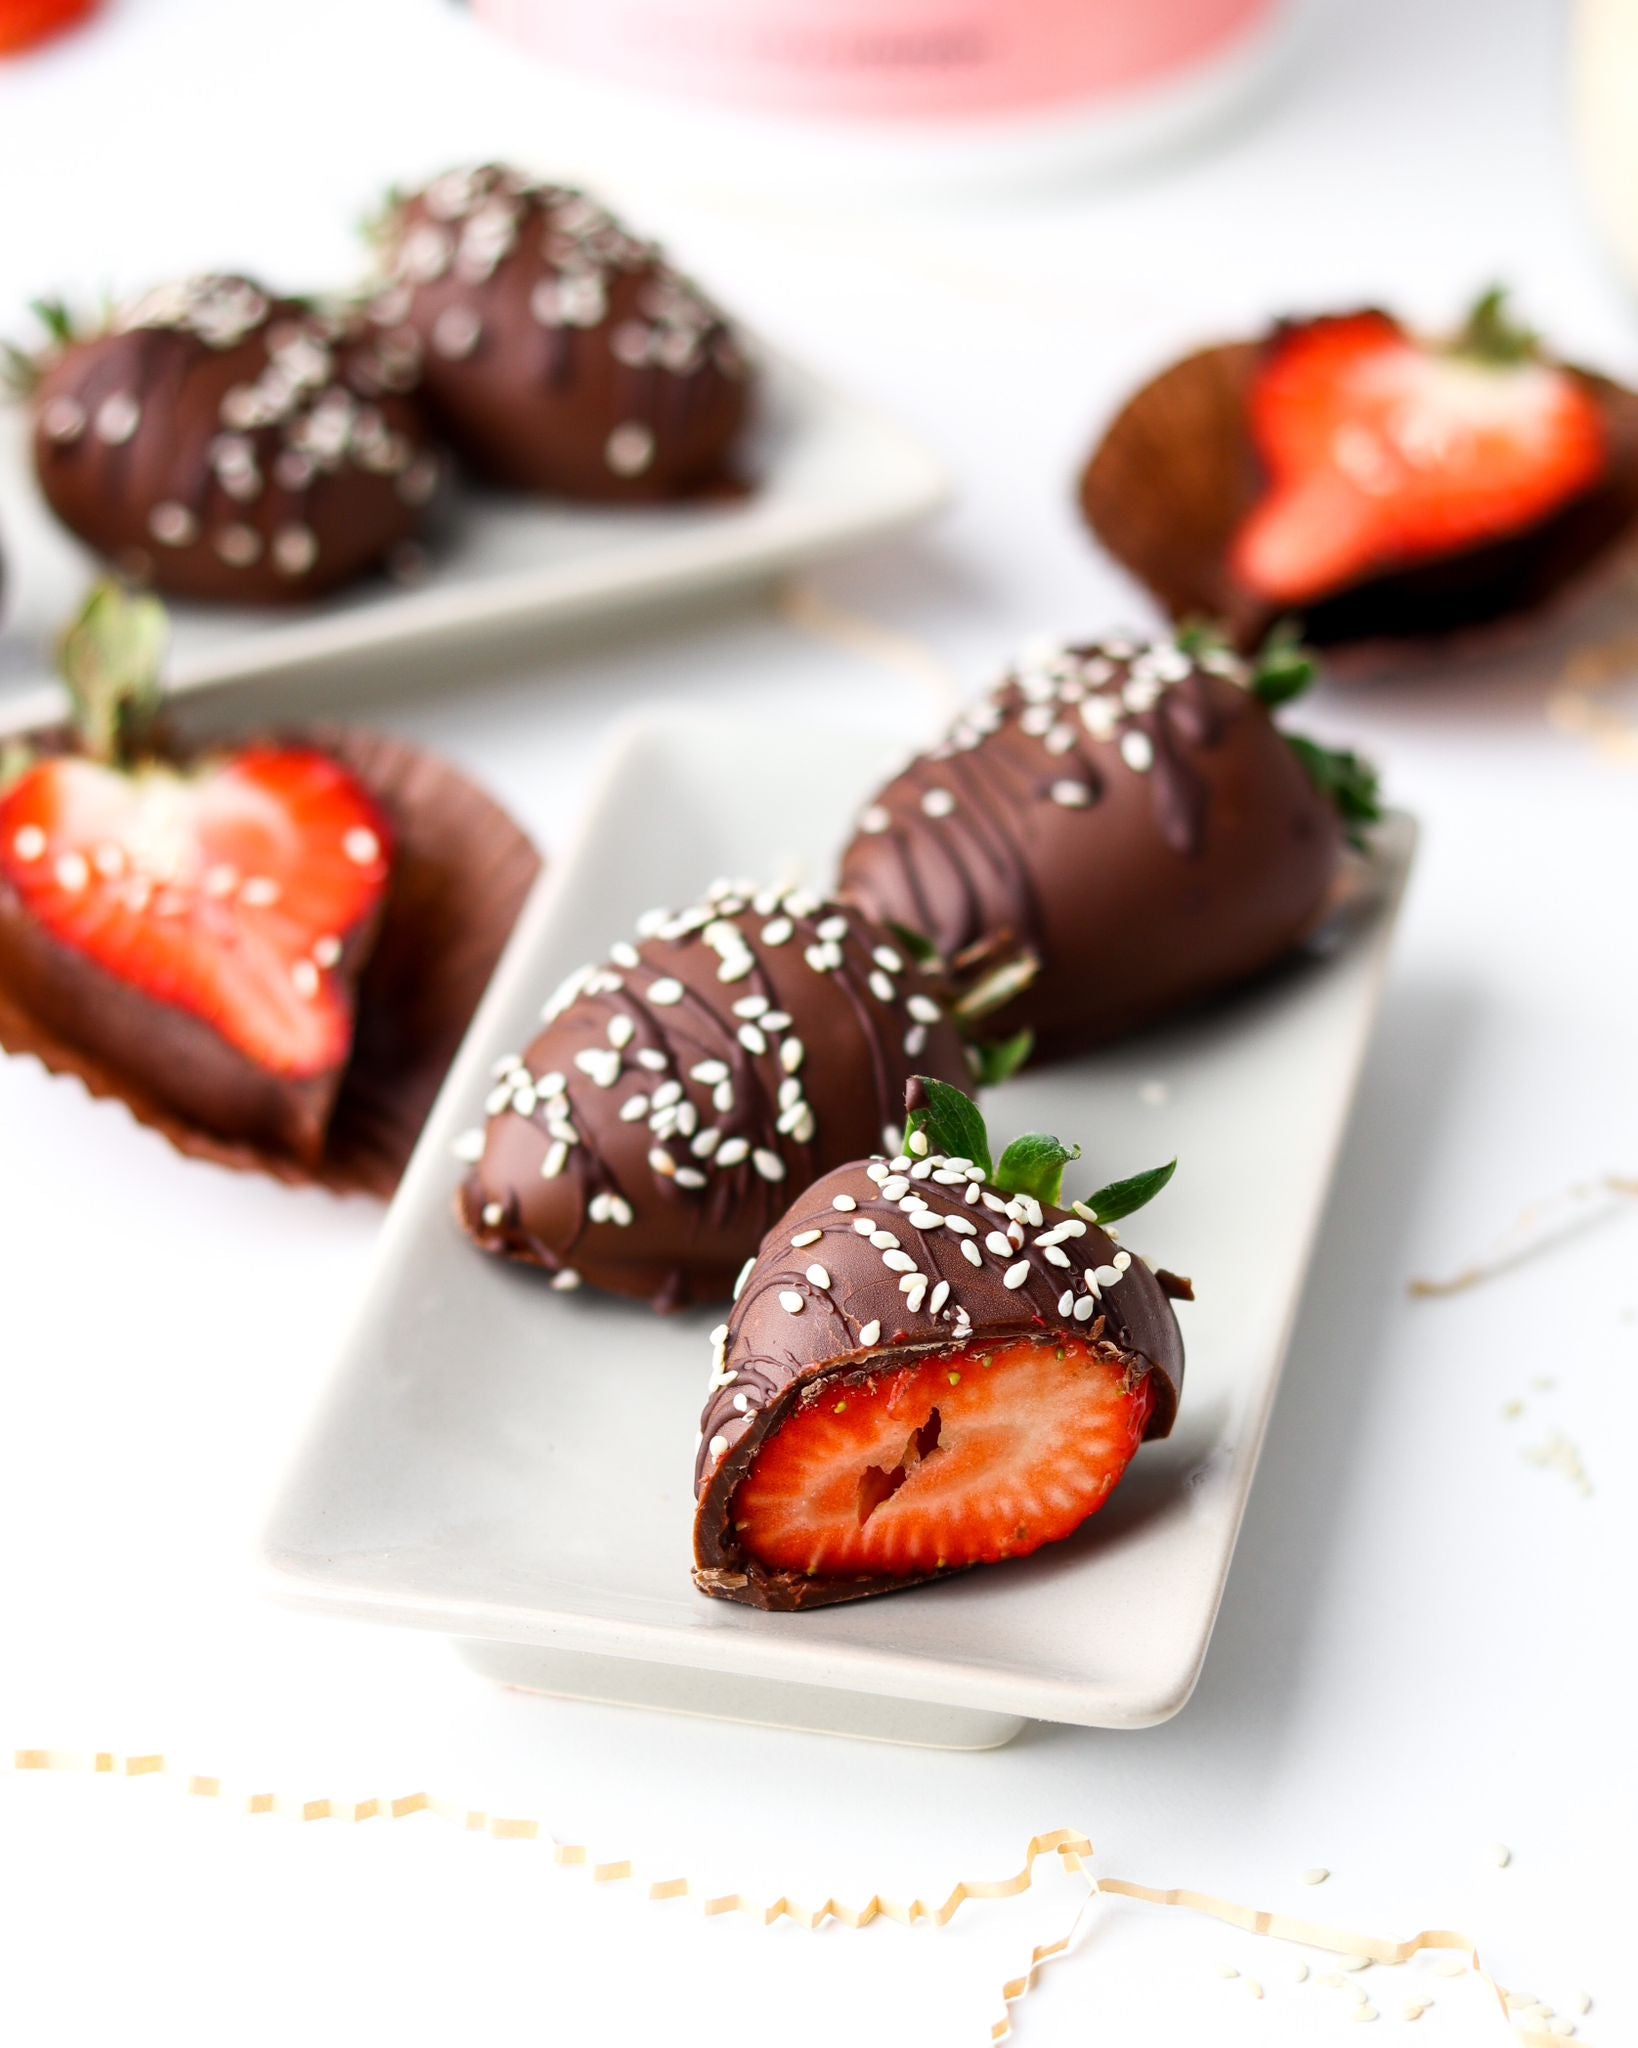 STRAWBERRIES COATED IN A STRAWBERRY CHOCOLATE COATING